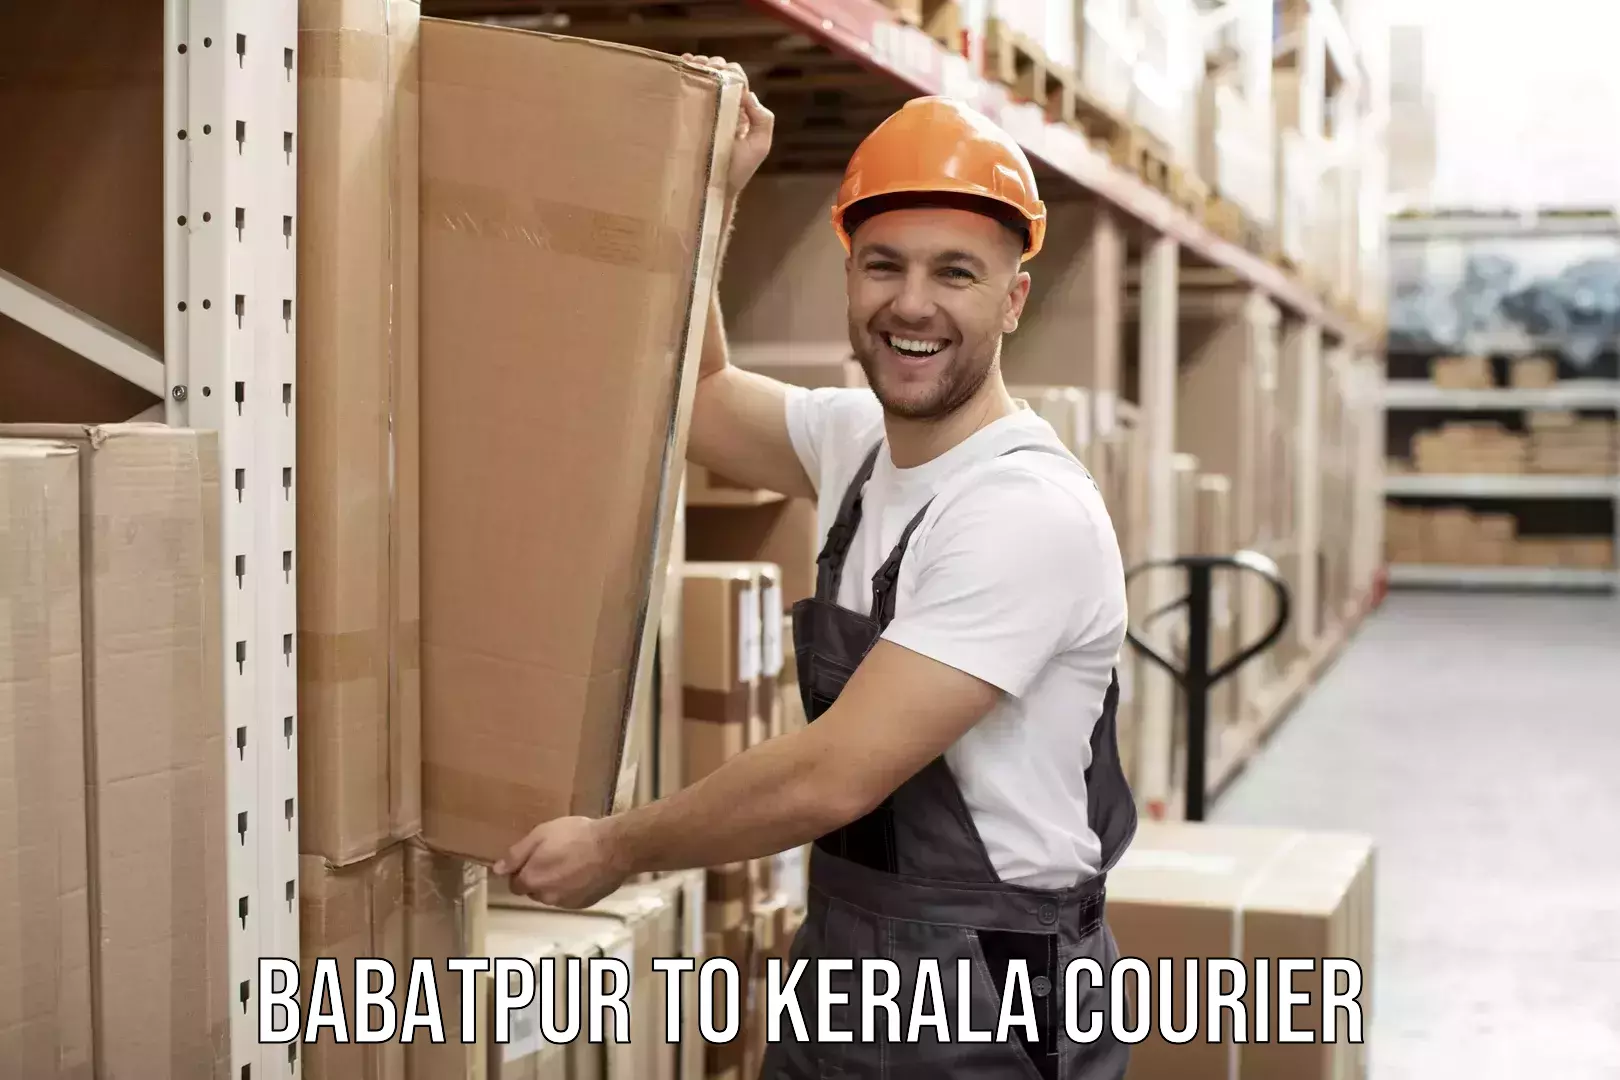 Furniture delivery service Babatpur to Kodungallur